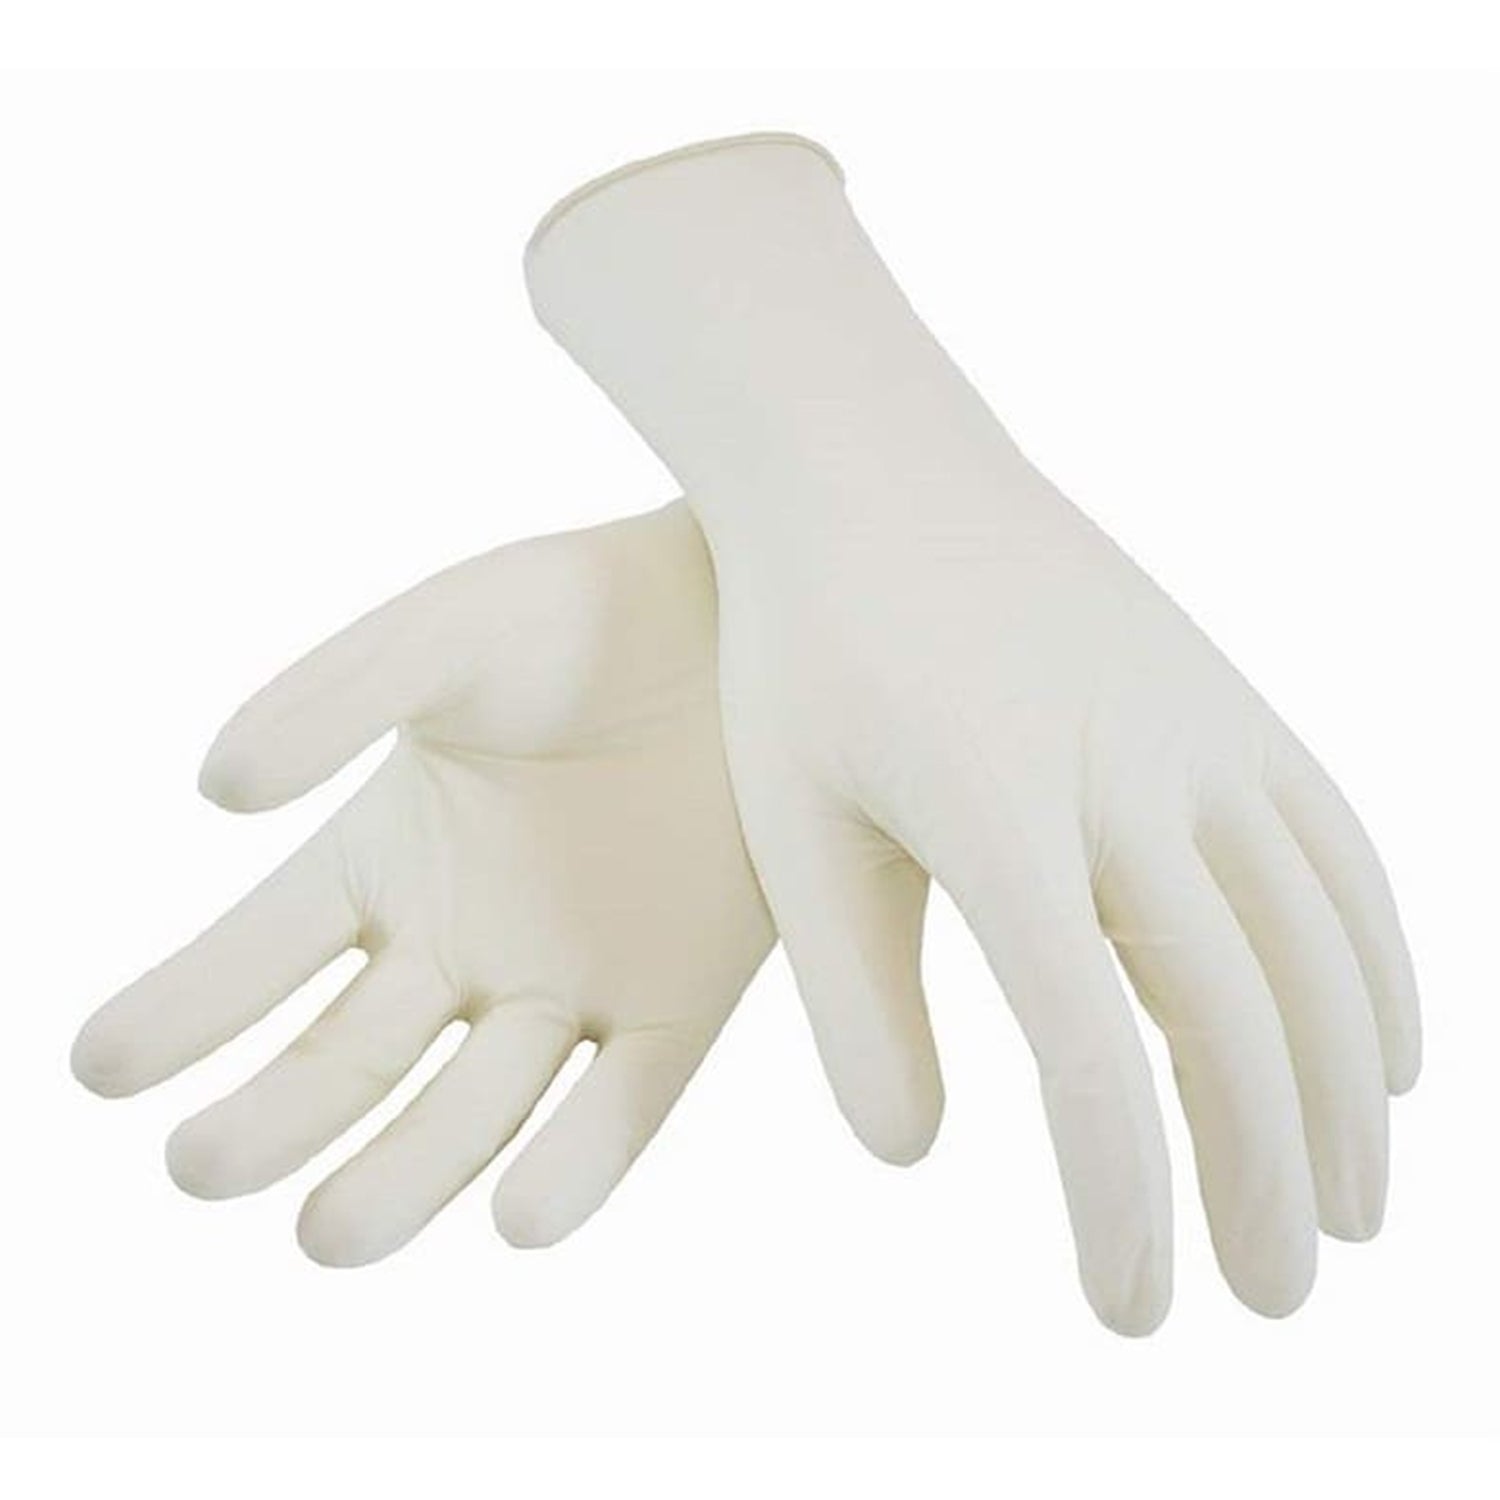 Premier Latex Sterile Powder Free Gloves | Small | Pack of 50 pairs (4)